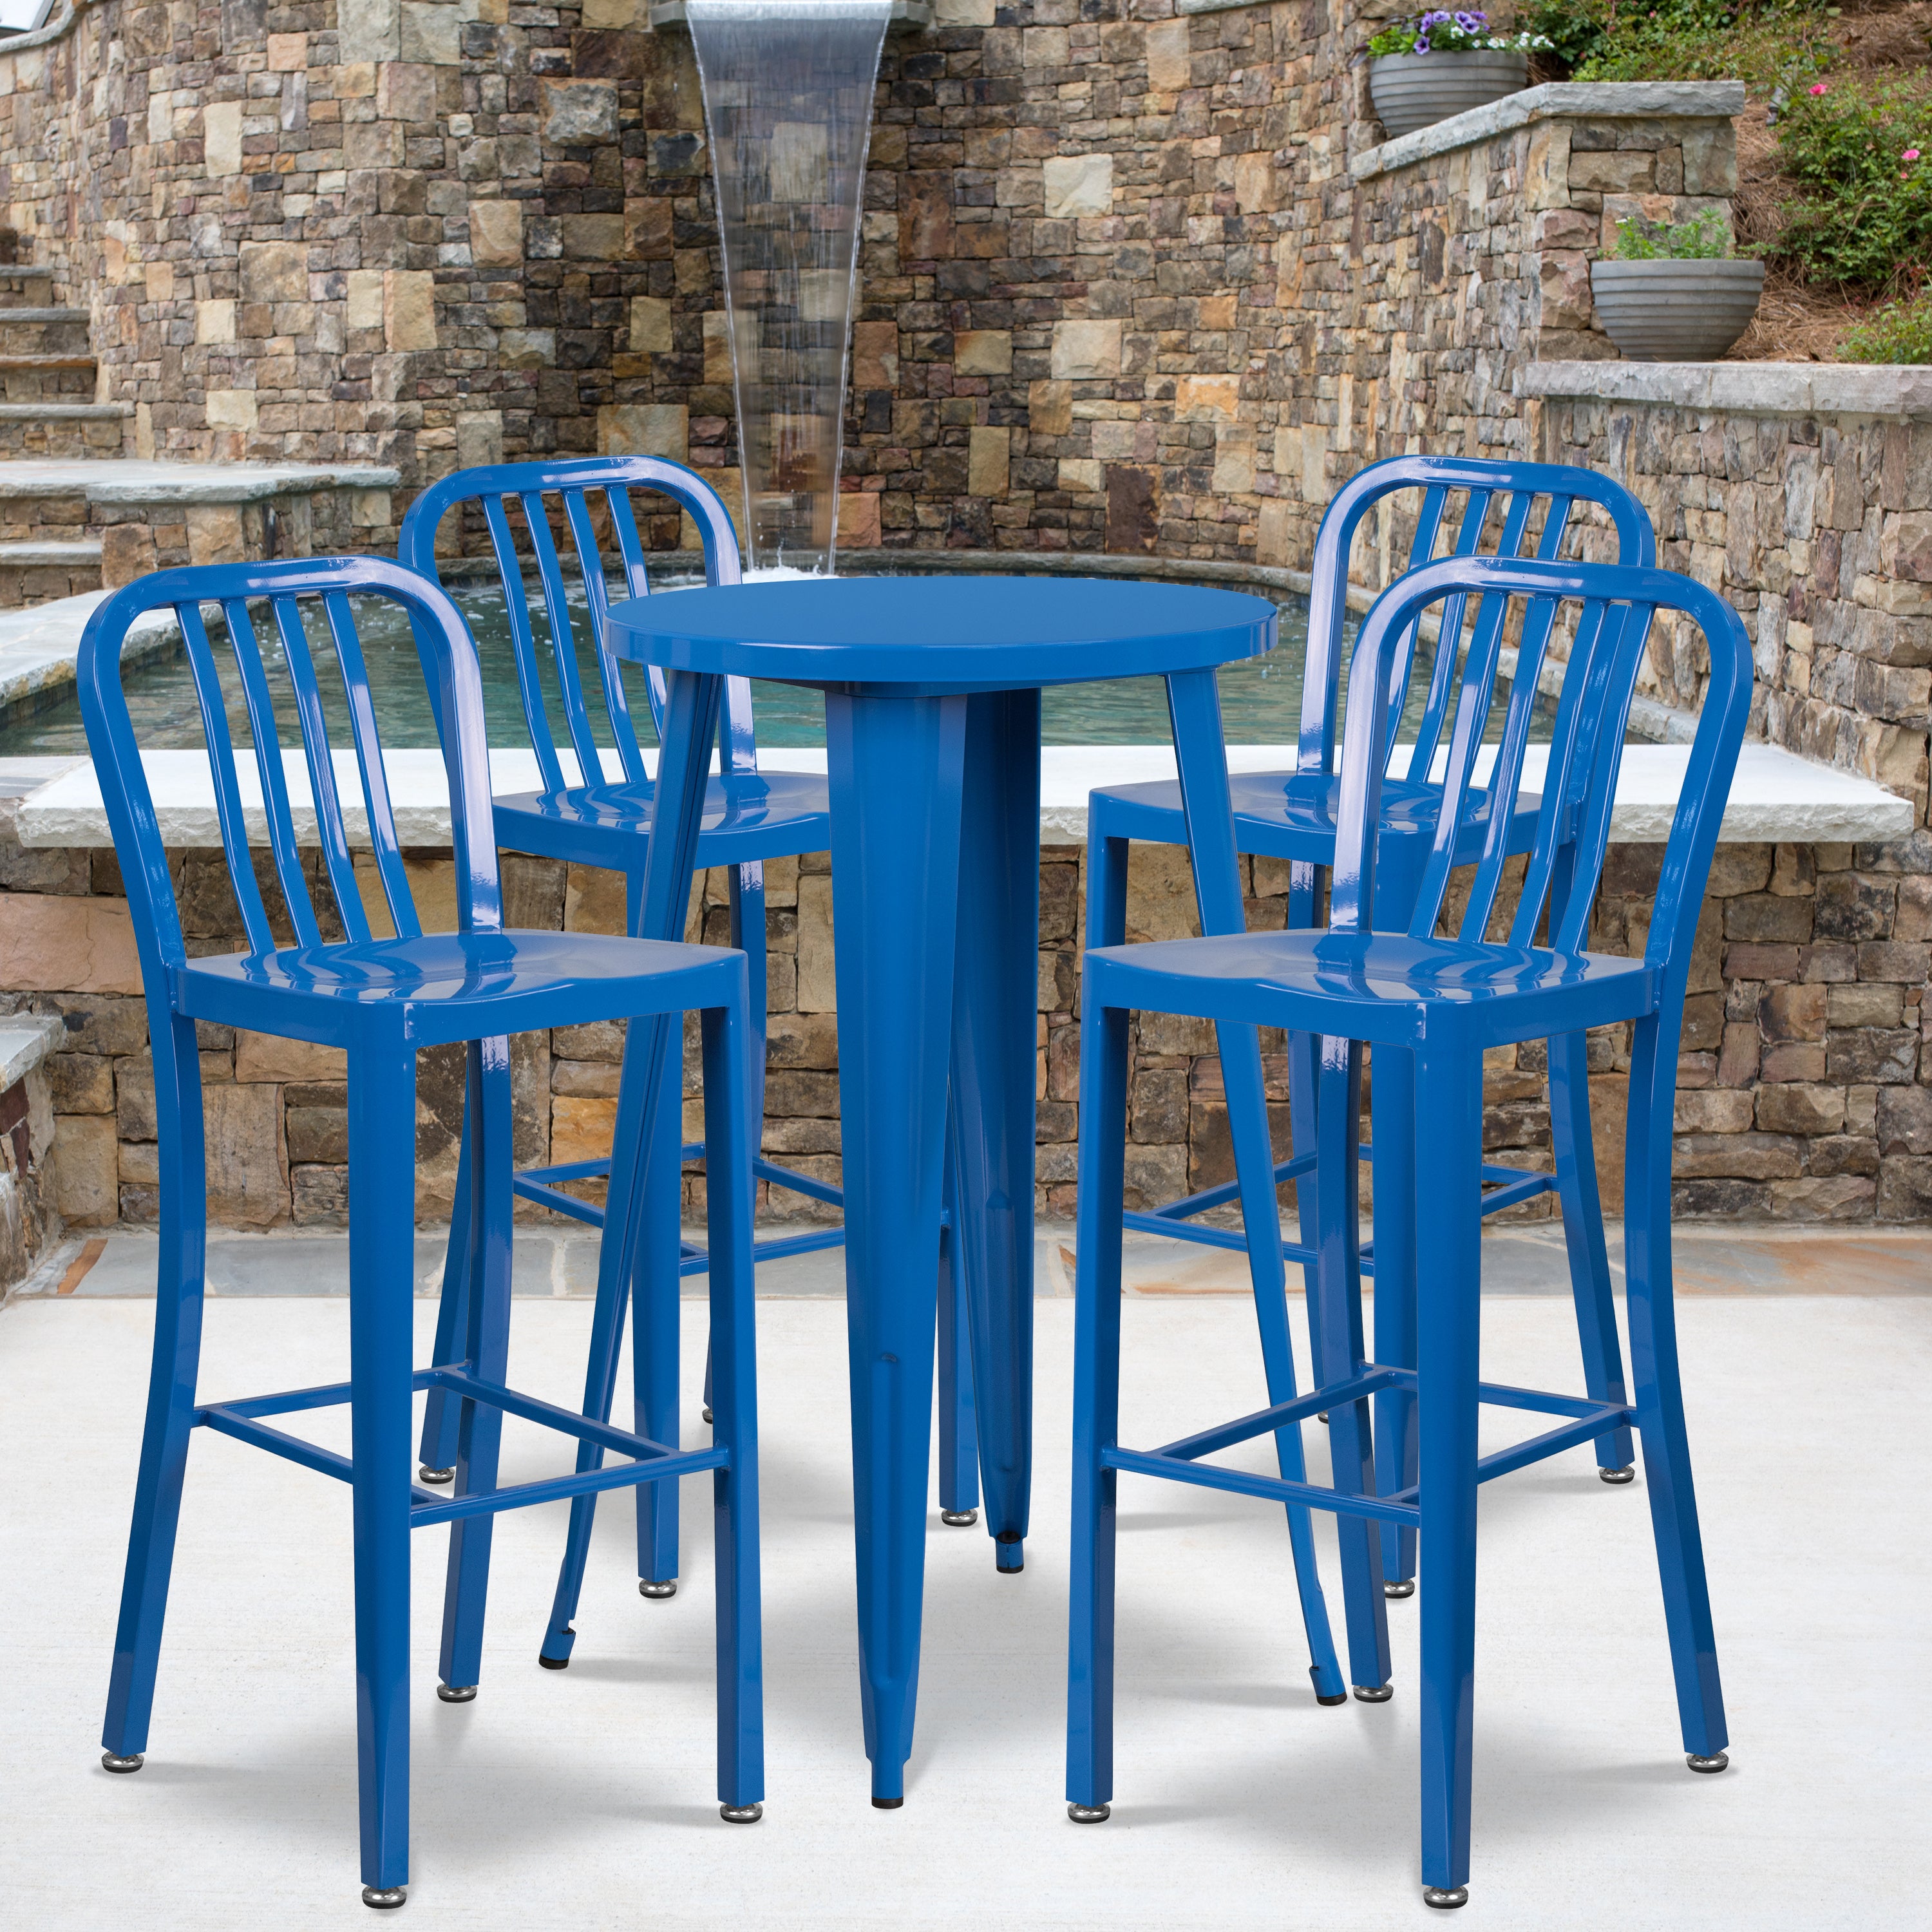 Commercial Grade 24" Round Metal Indoor-Outdoor Bar Table Set with 4 Vertical Slat Back Stools-Metal Colorful Bar Table and Stool Set-Flash Furniture-Wall2Wall Furnishings